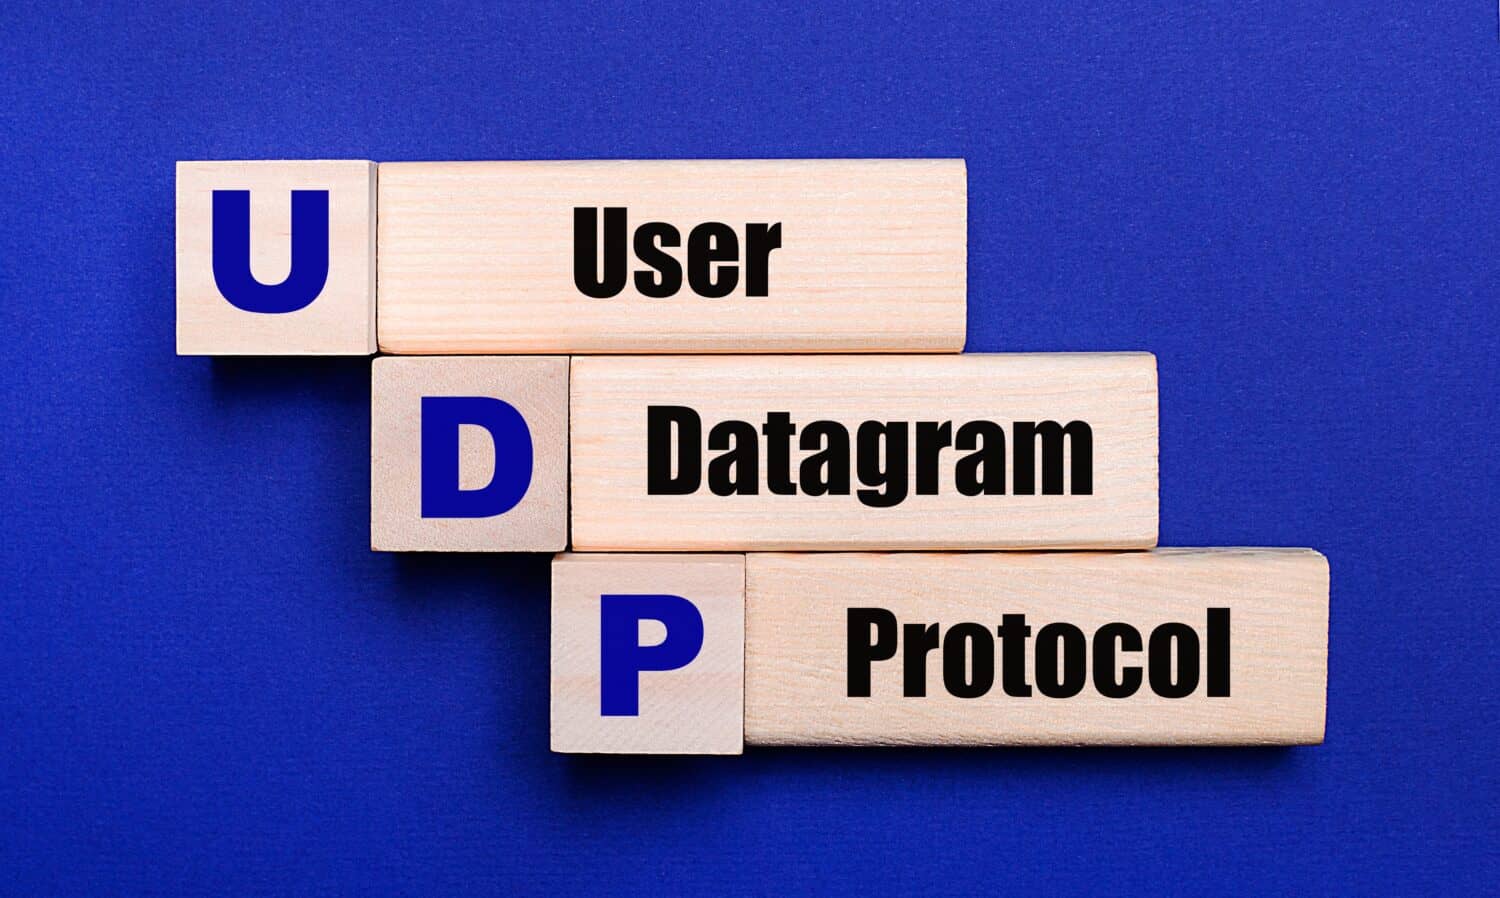 On a bright blue background, light wooden blocks and cubes with the text UDP User Datagram Protocol